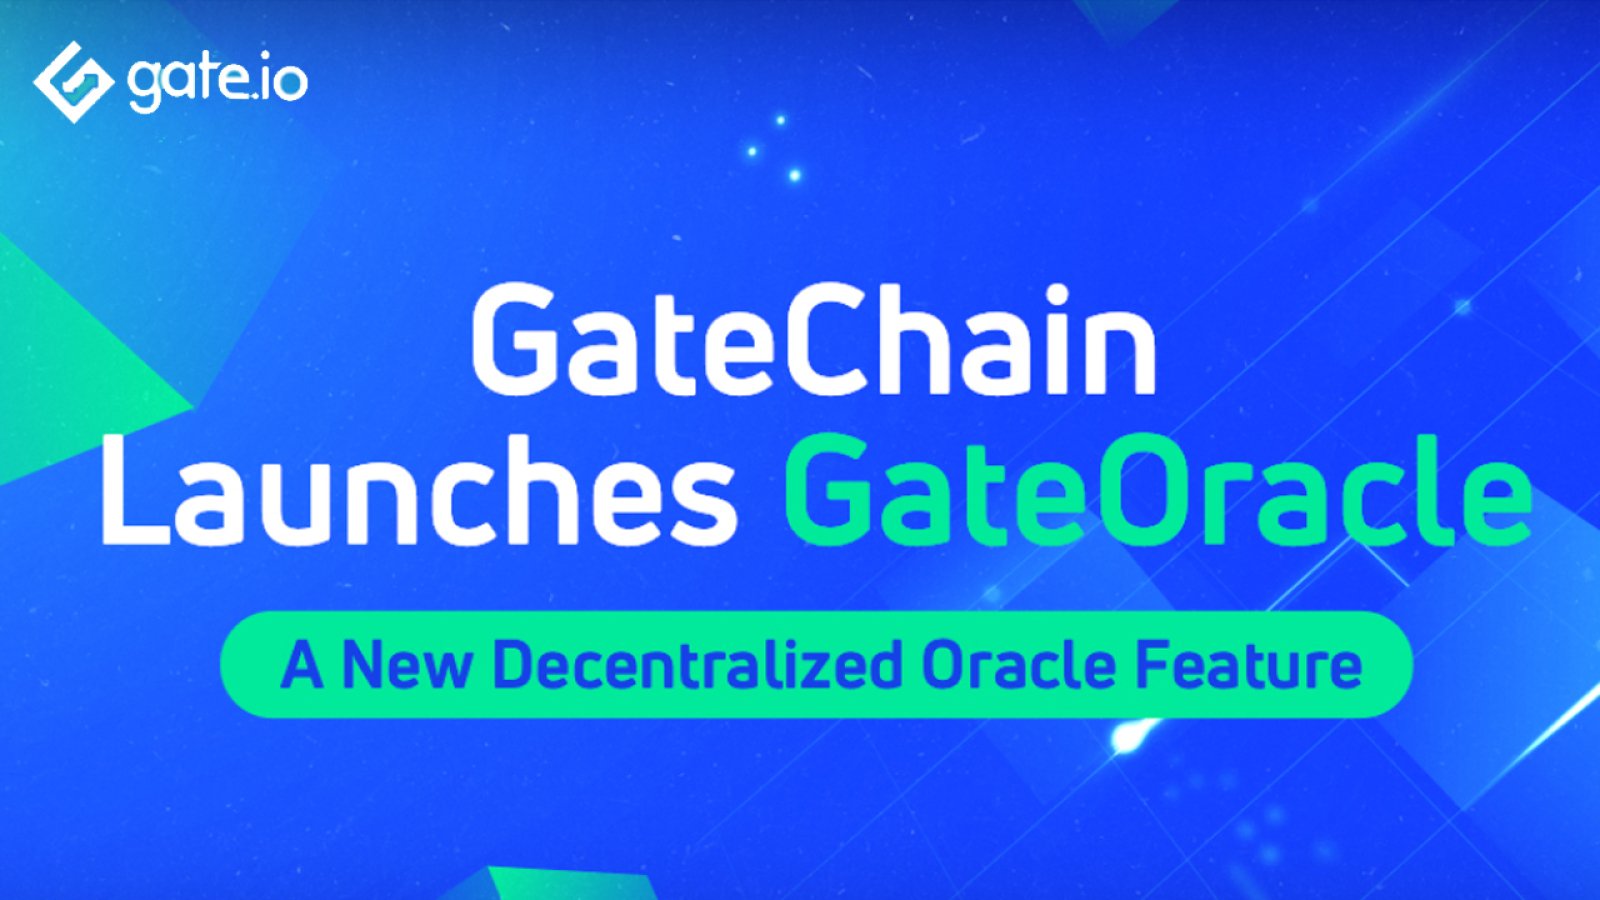 GateChain Launches GateOracle – A New Decentralized Oracle Feature